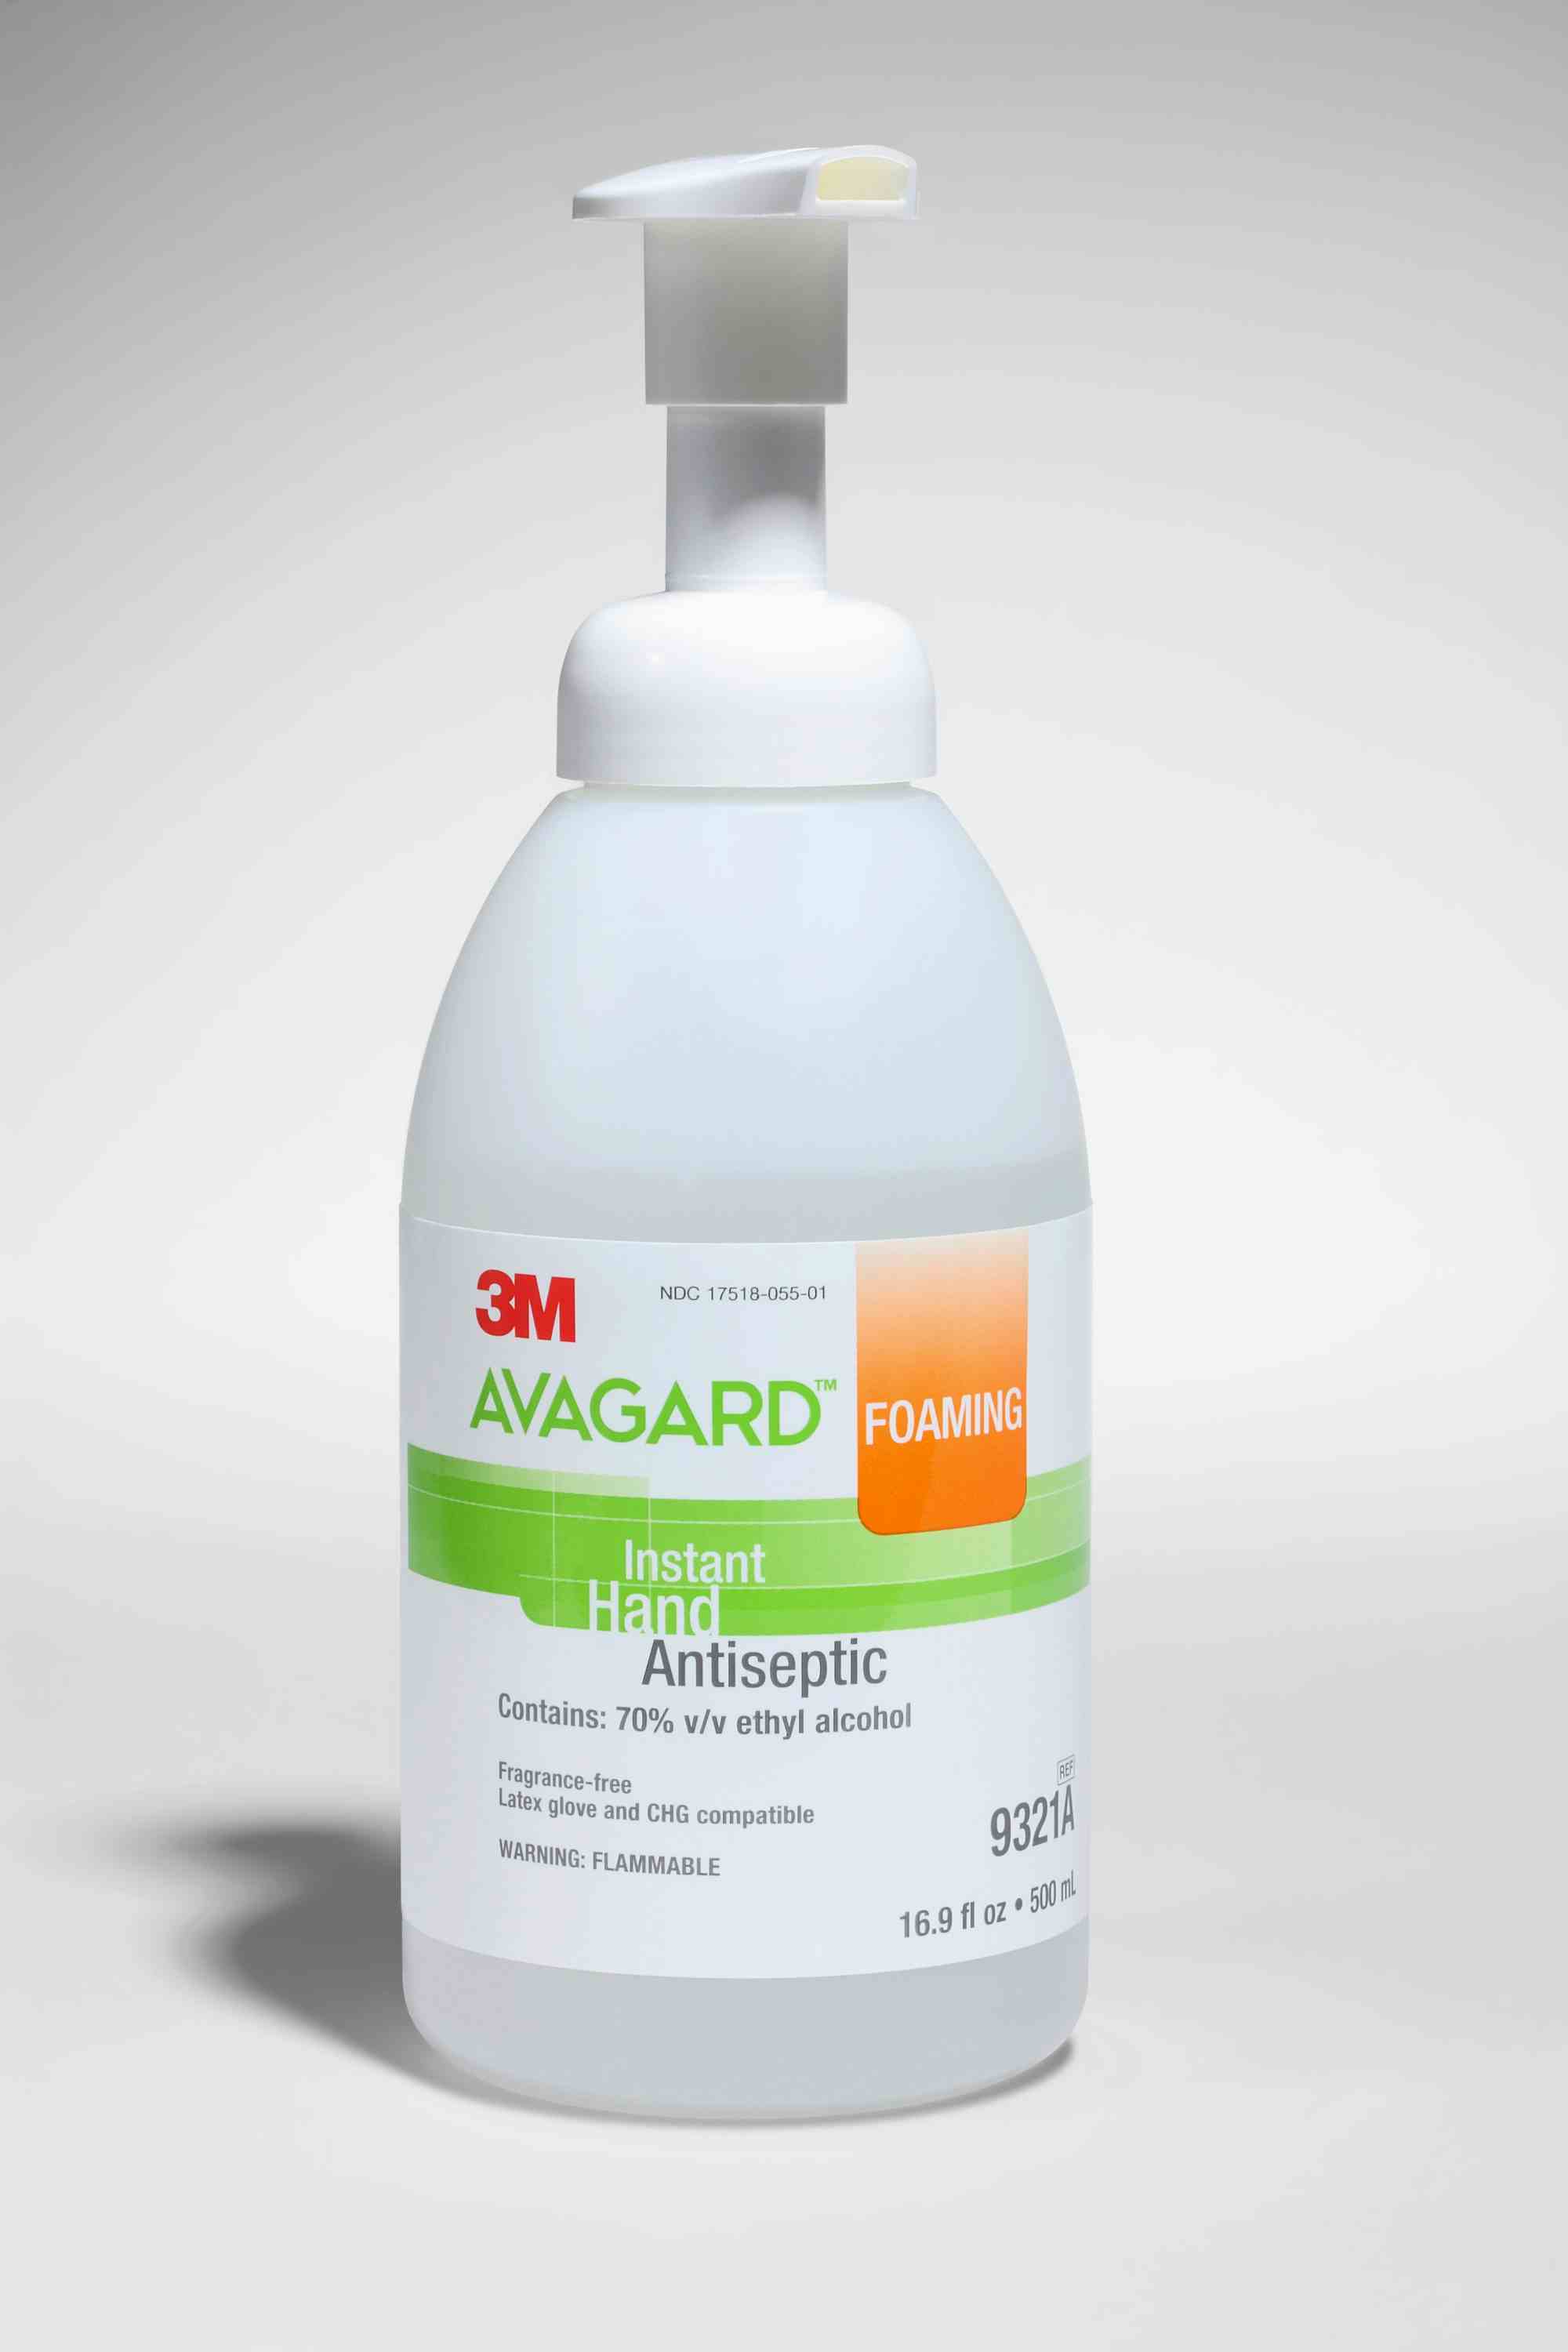 3M Avagard Foaming Instant Hand Antiseptic, 9321A, 16.9 oz - 1 Each